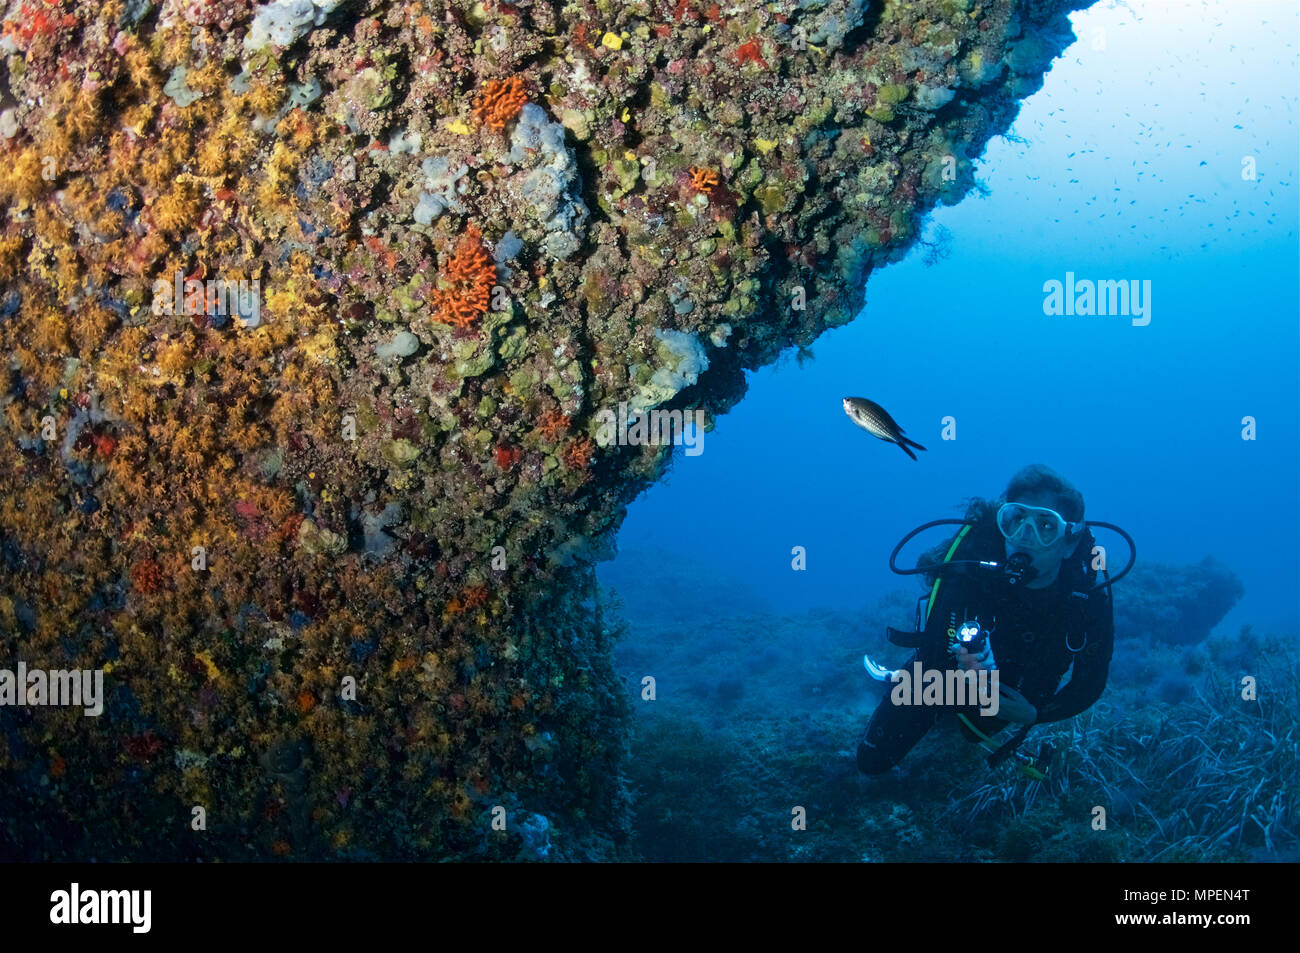 Underwater scene with a female scuba diver with torch looking at reef marine life in Ses Salines Natural Park (Formentera, Mediterranean sea, Spain) Stock Photo